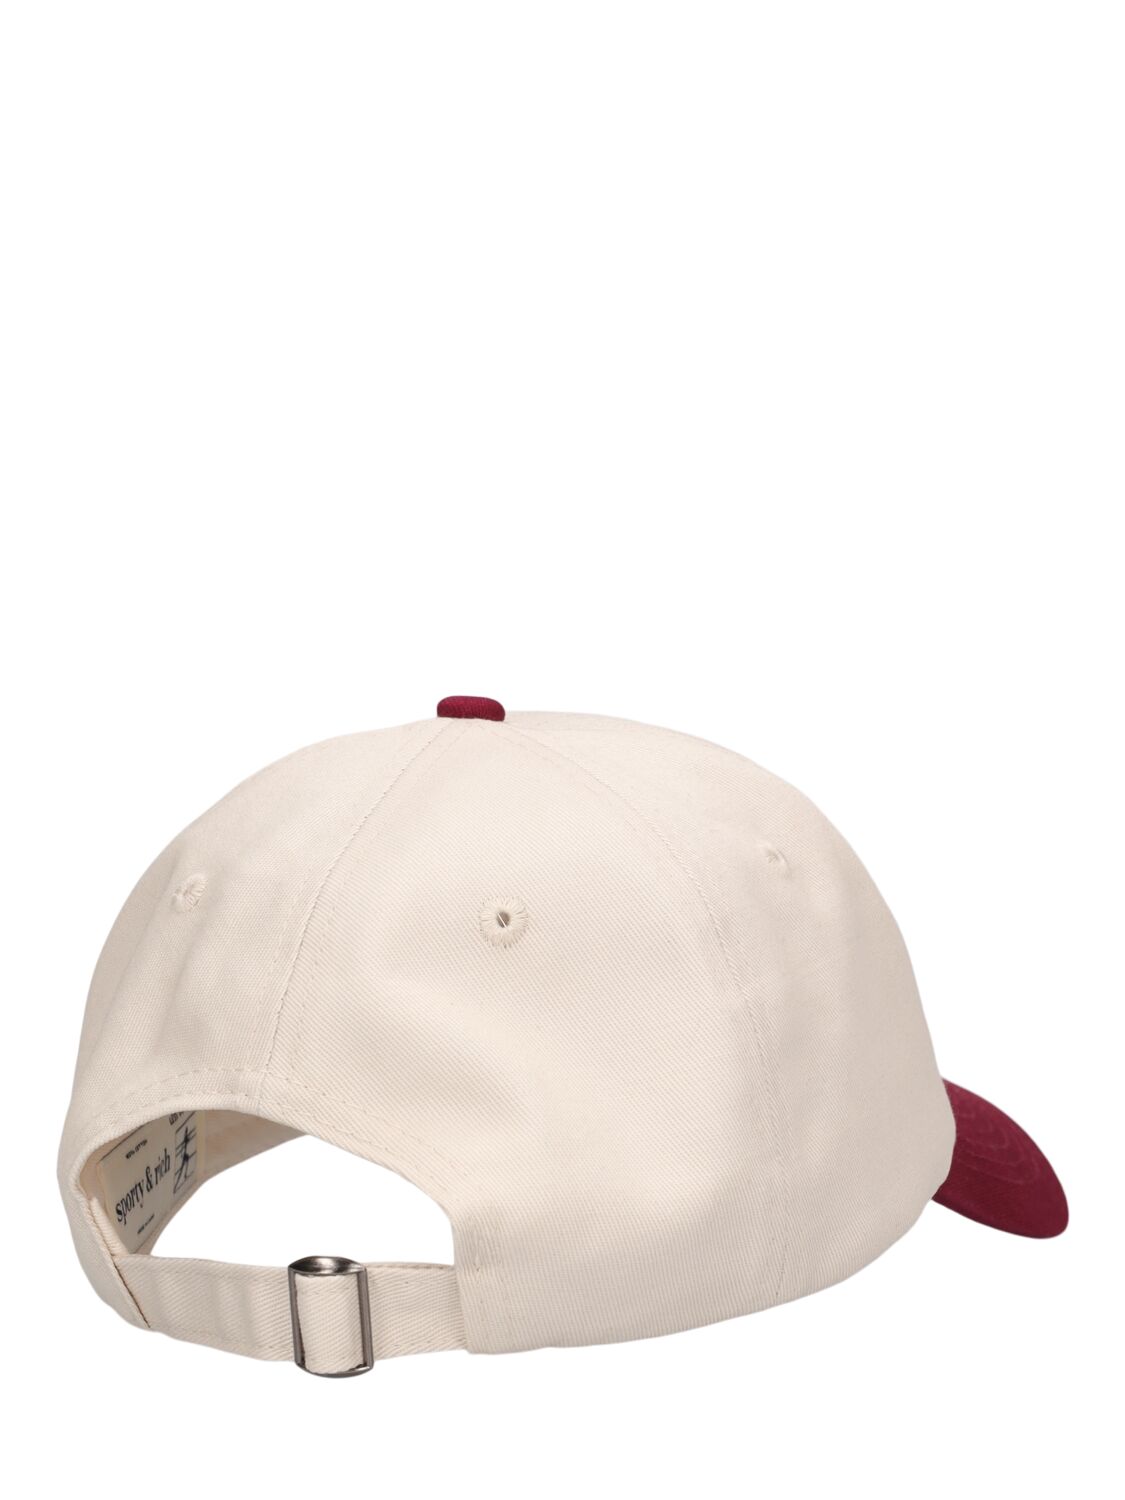 Shop Sporty And Rich Rizzoli Tennis Unisex Hat In Beige,white